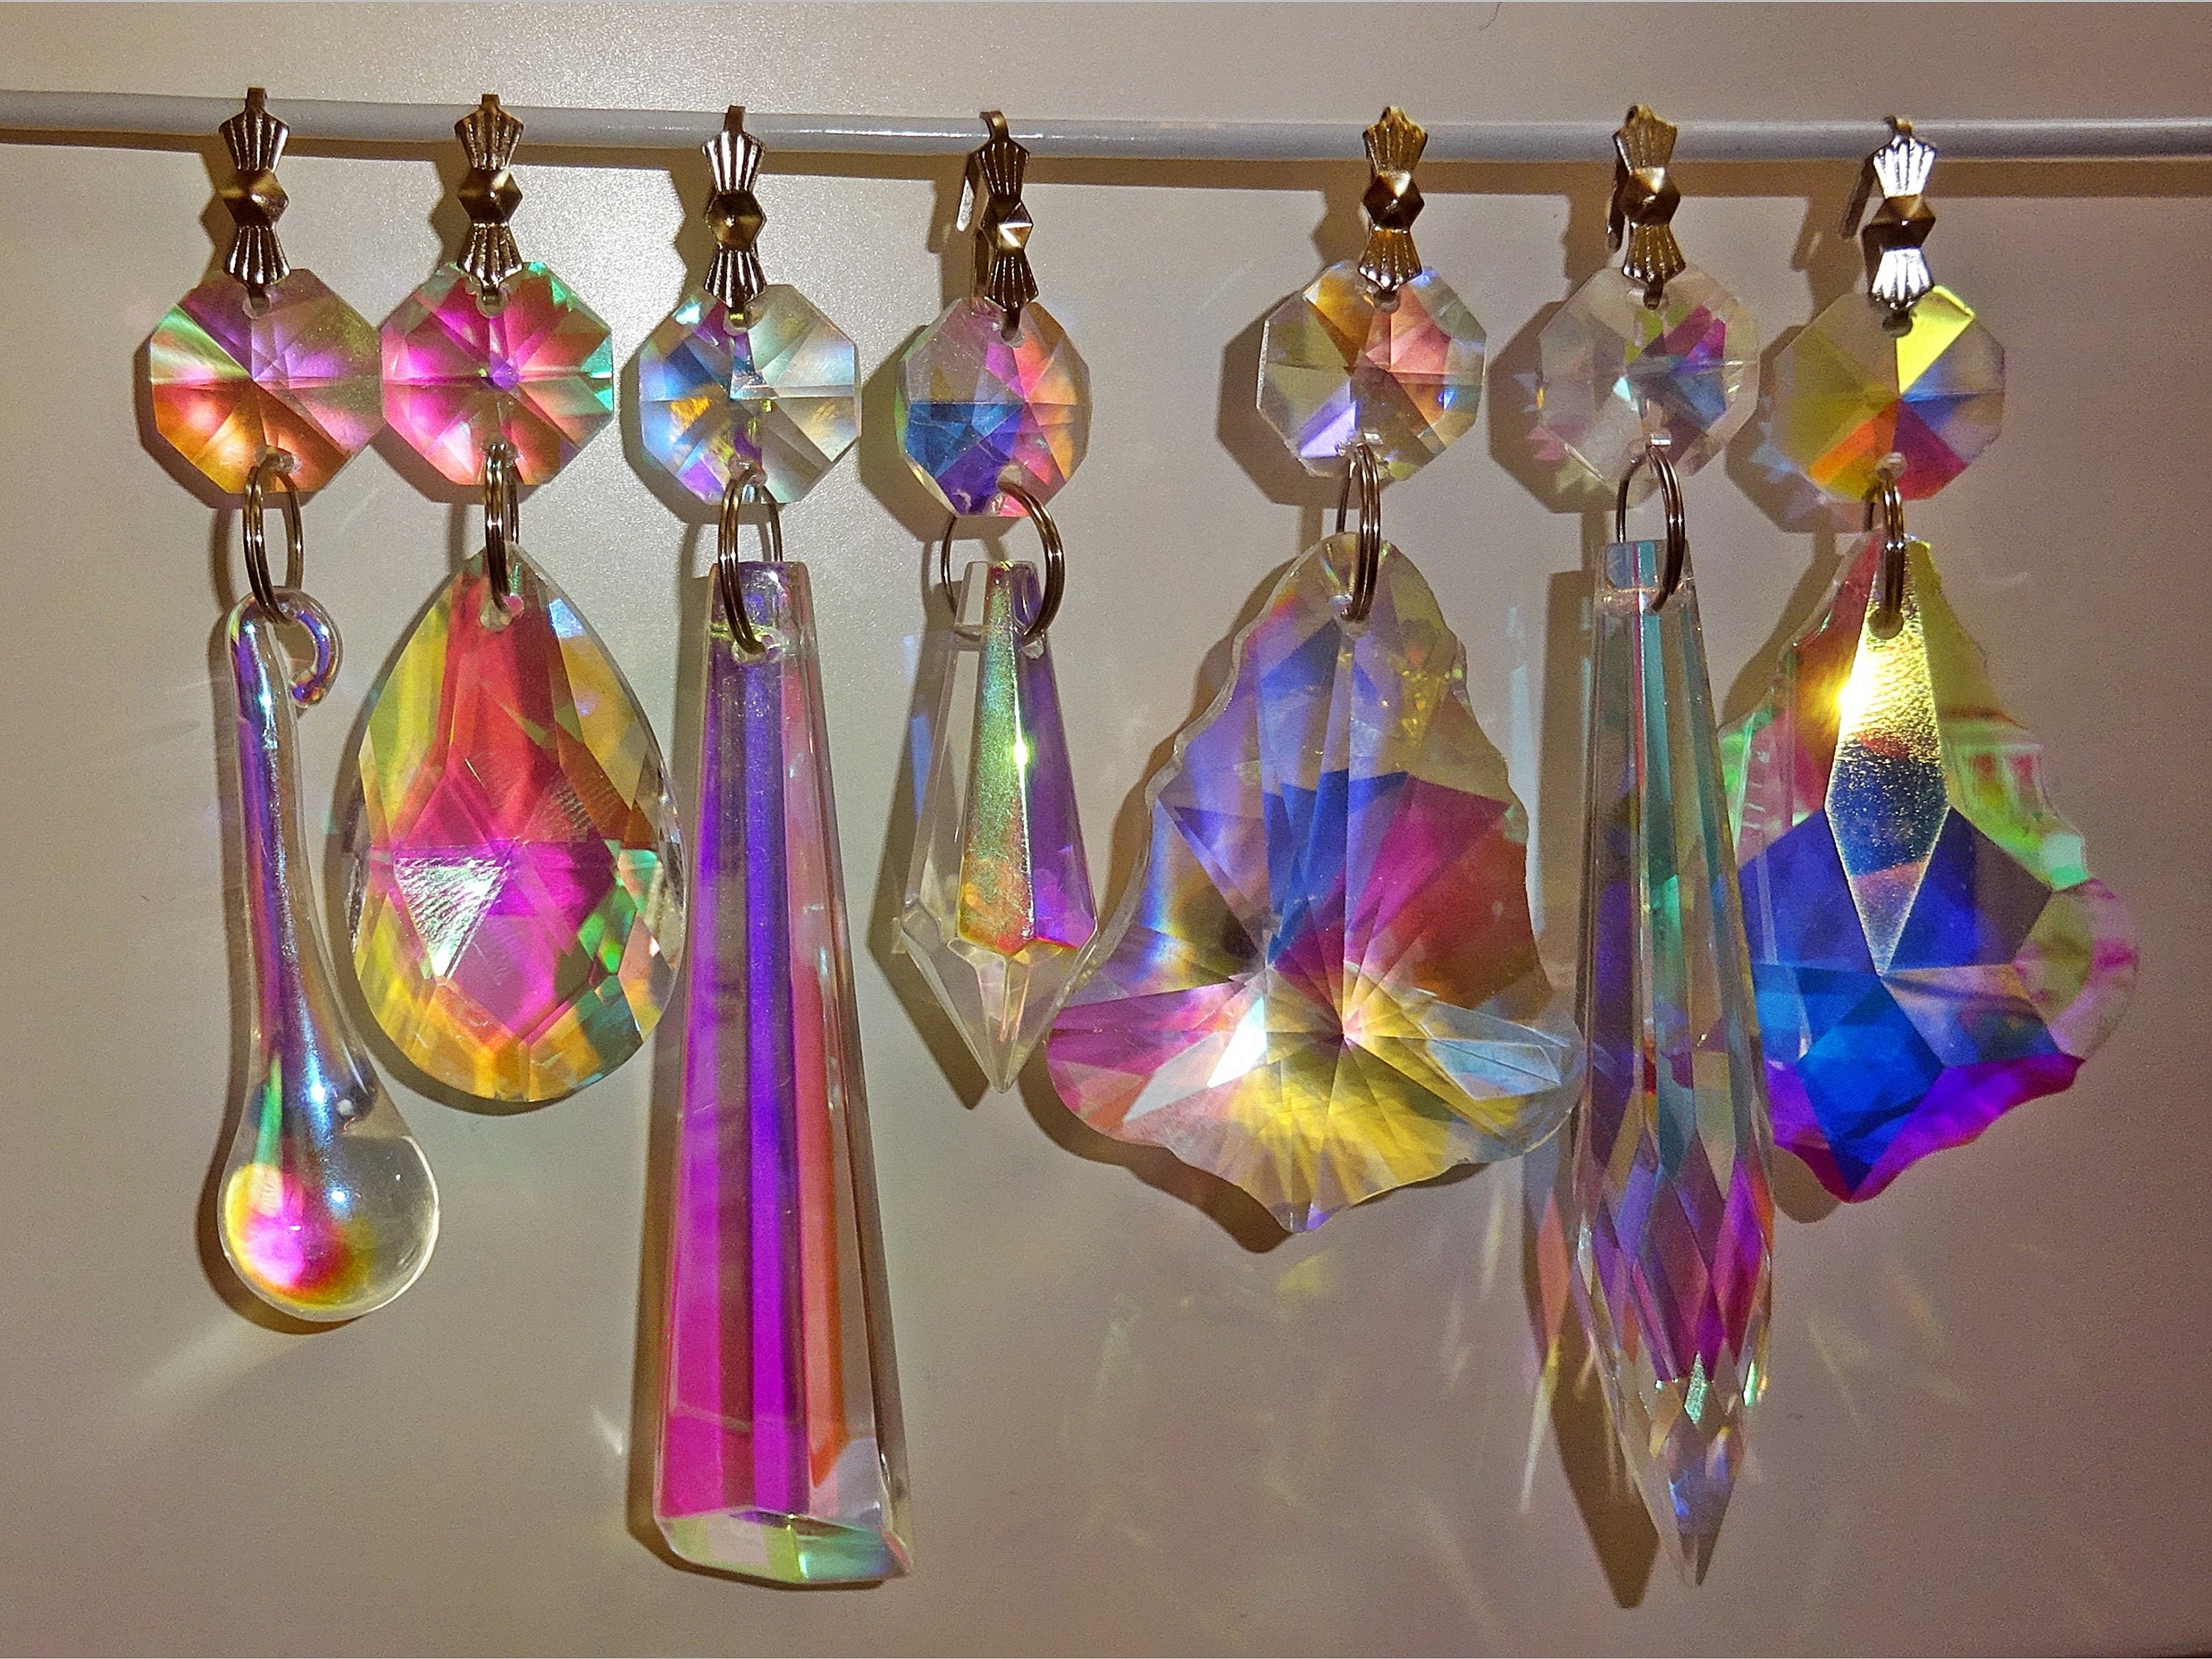 CHANDELIER GLASS CRYSTALS DROPS ANTIQUE AB DROPLETS ICICLE IRIDESCENT LAMP PARTS 